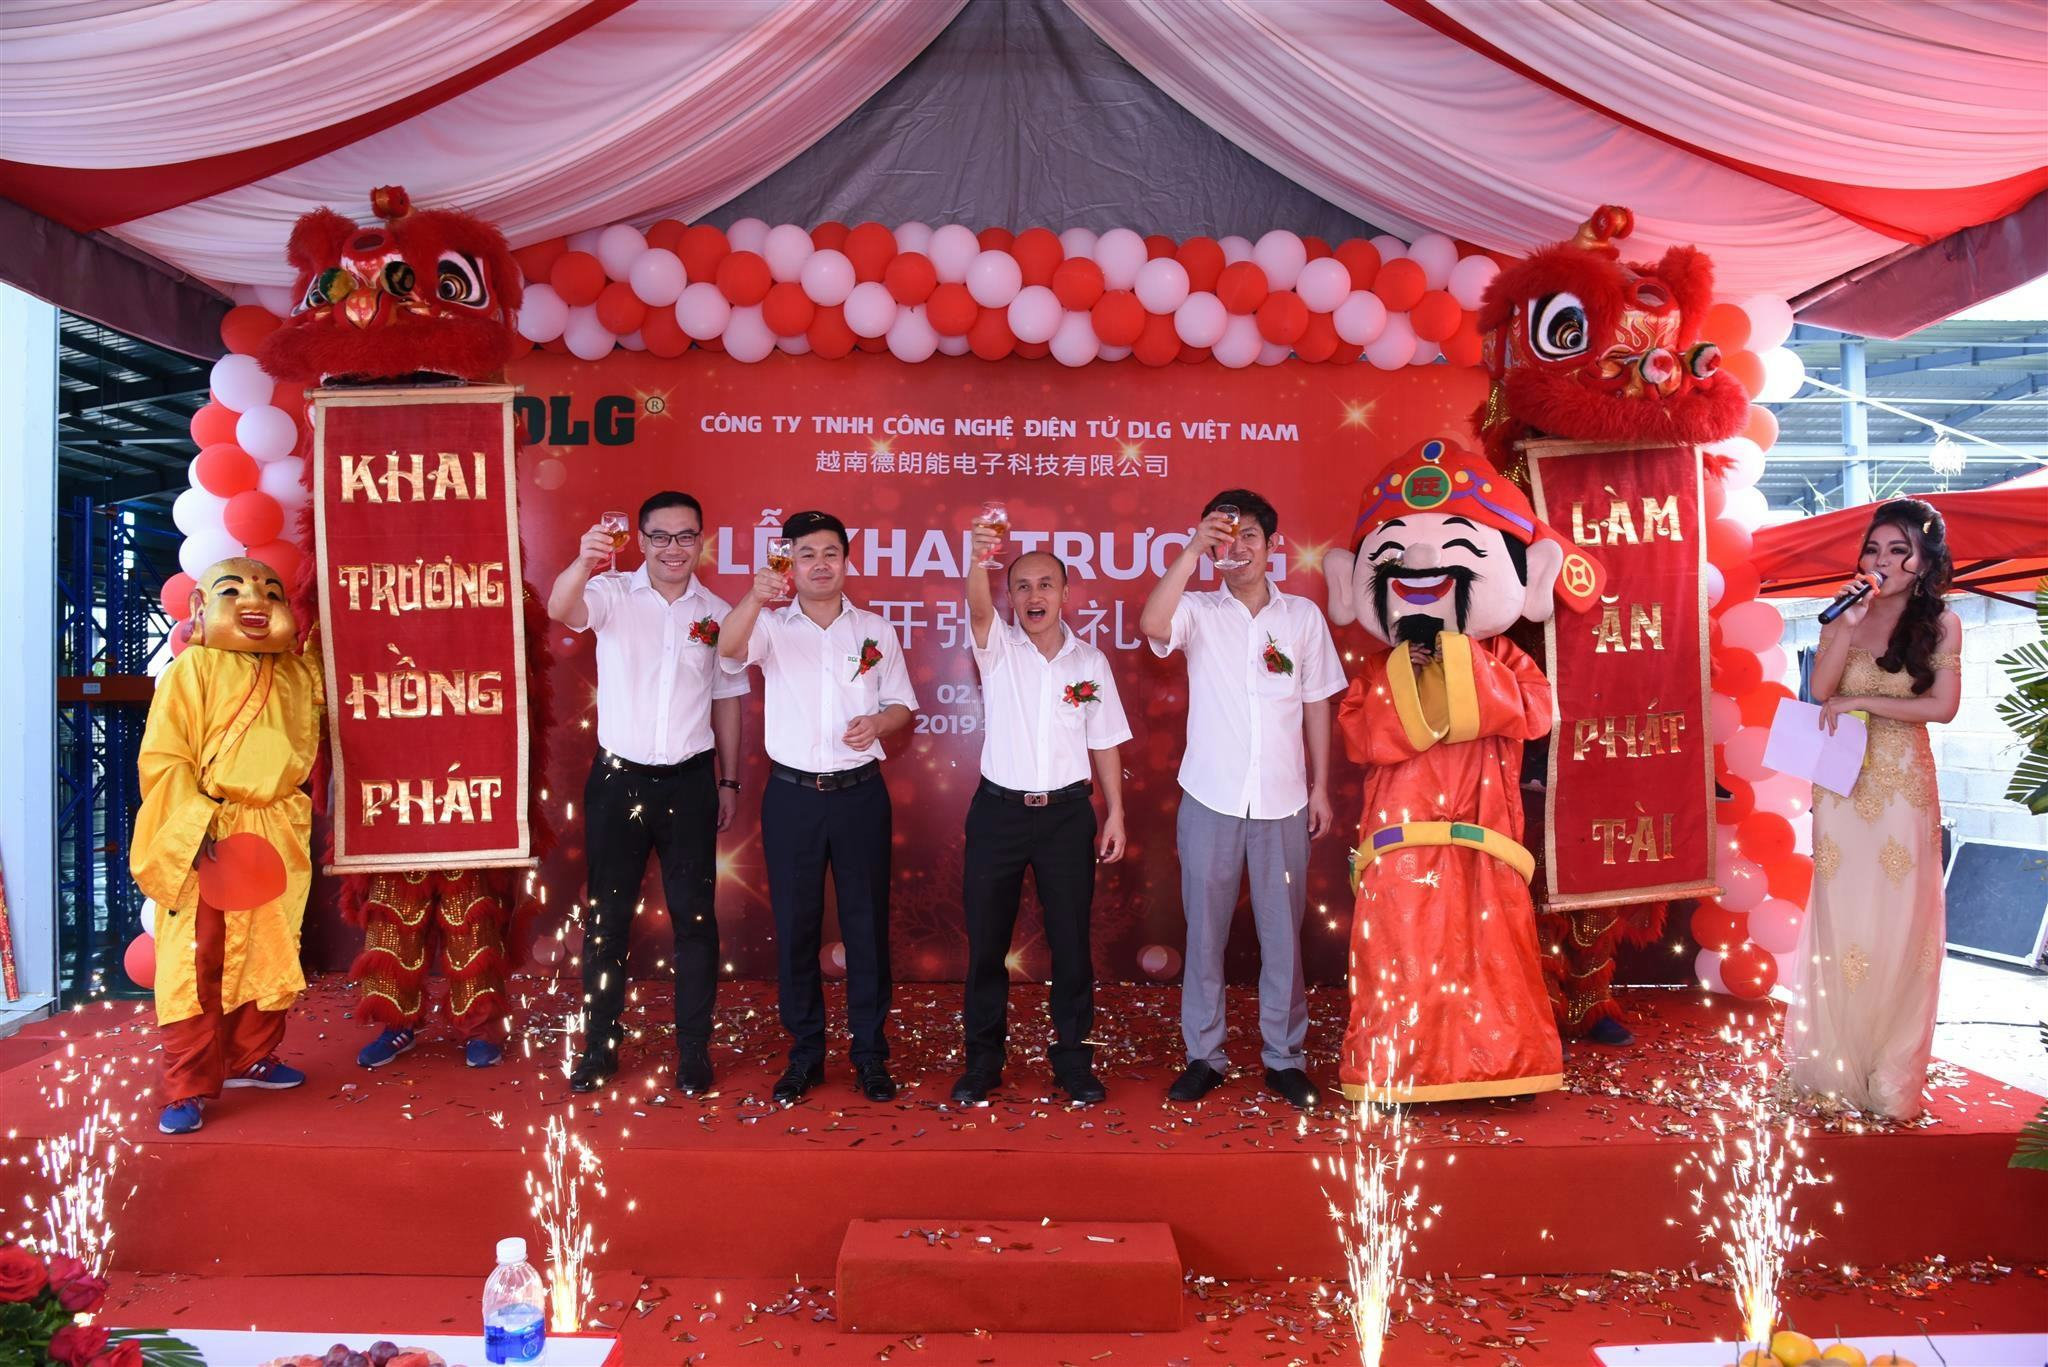 Official opening ceremony of DLG’s Vietnam battery pack making facility where e-bike batteries in all varieties are made. – Photo DLG